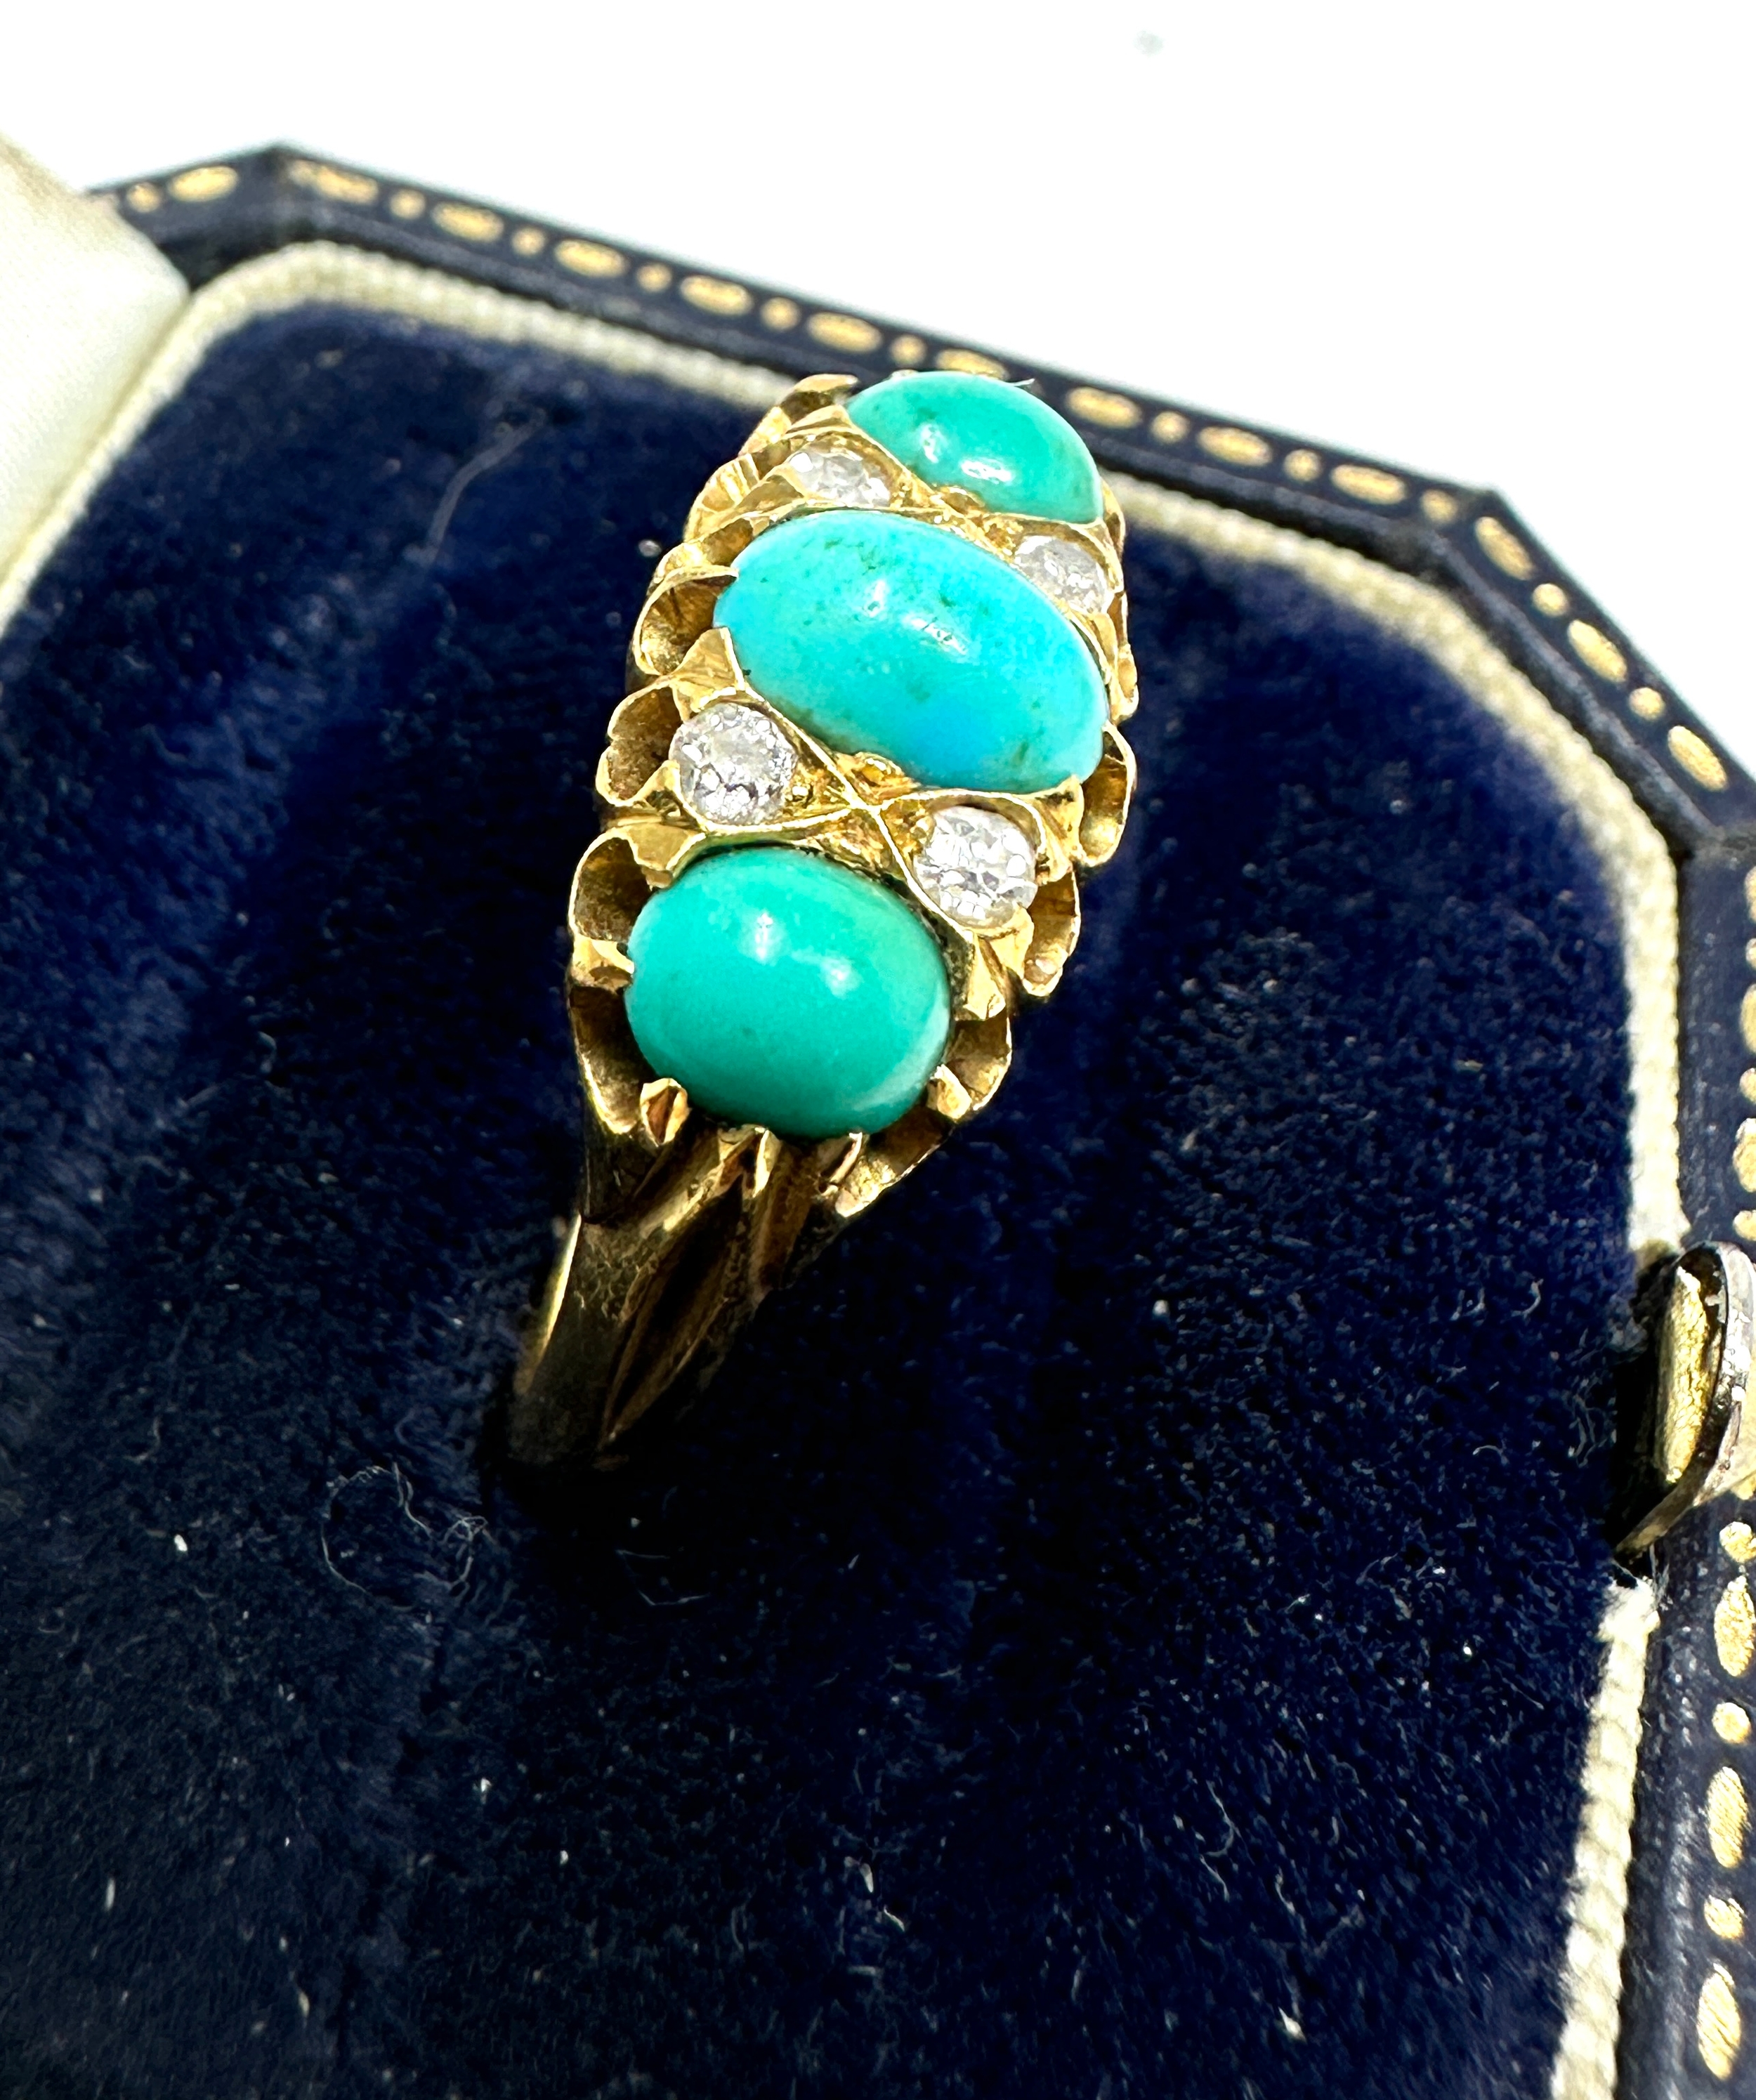 Antique 18ct turquoise & diamond ring weight 5.5g - Image 3 of 4